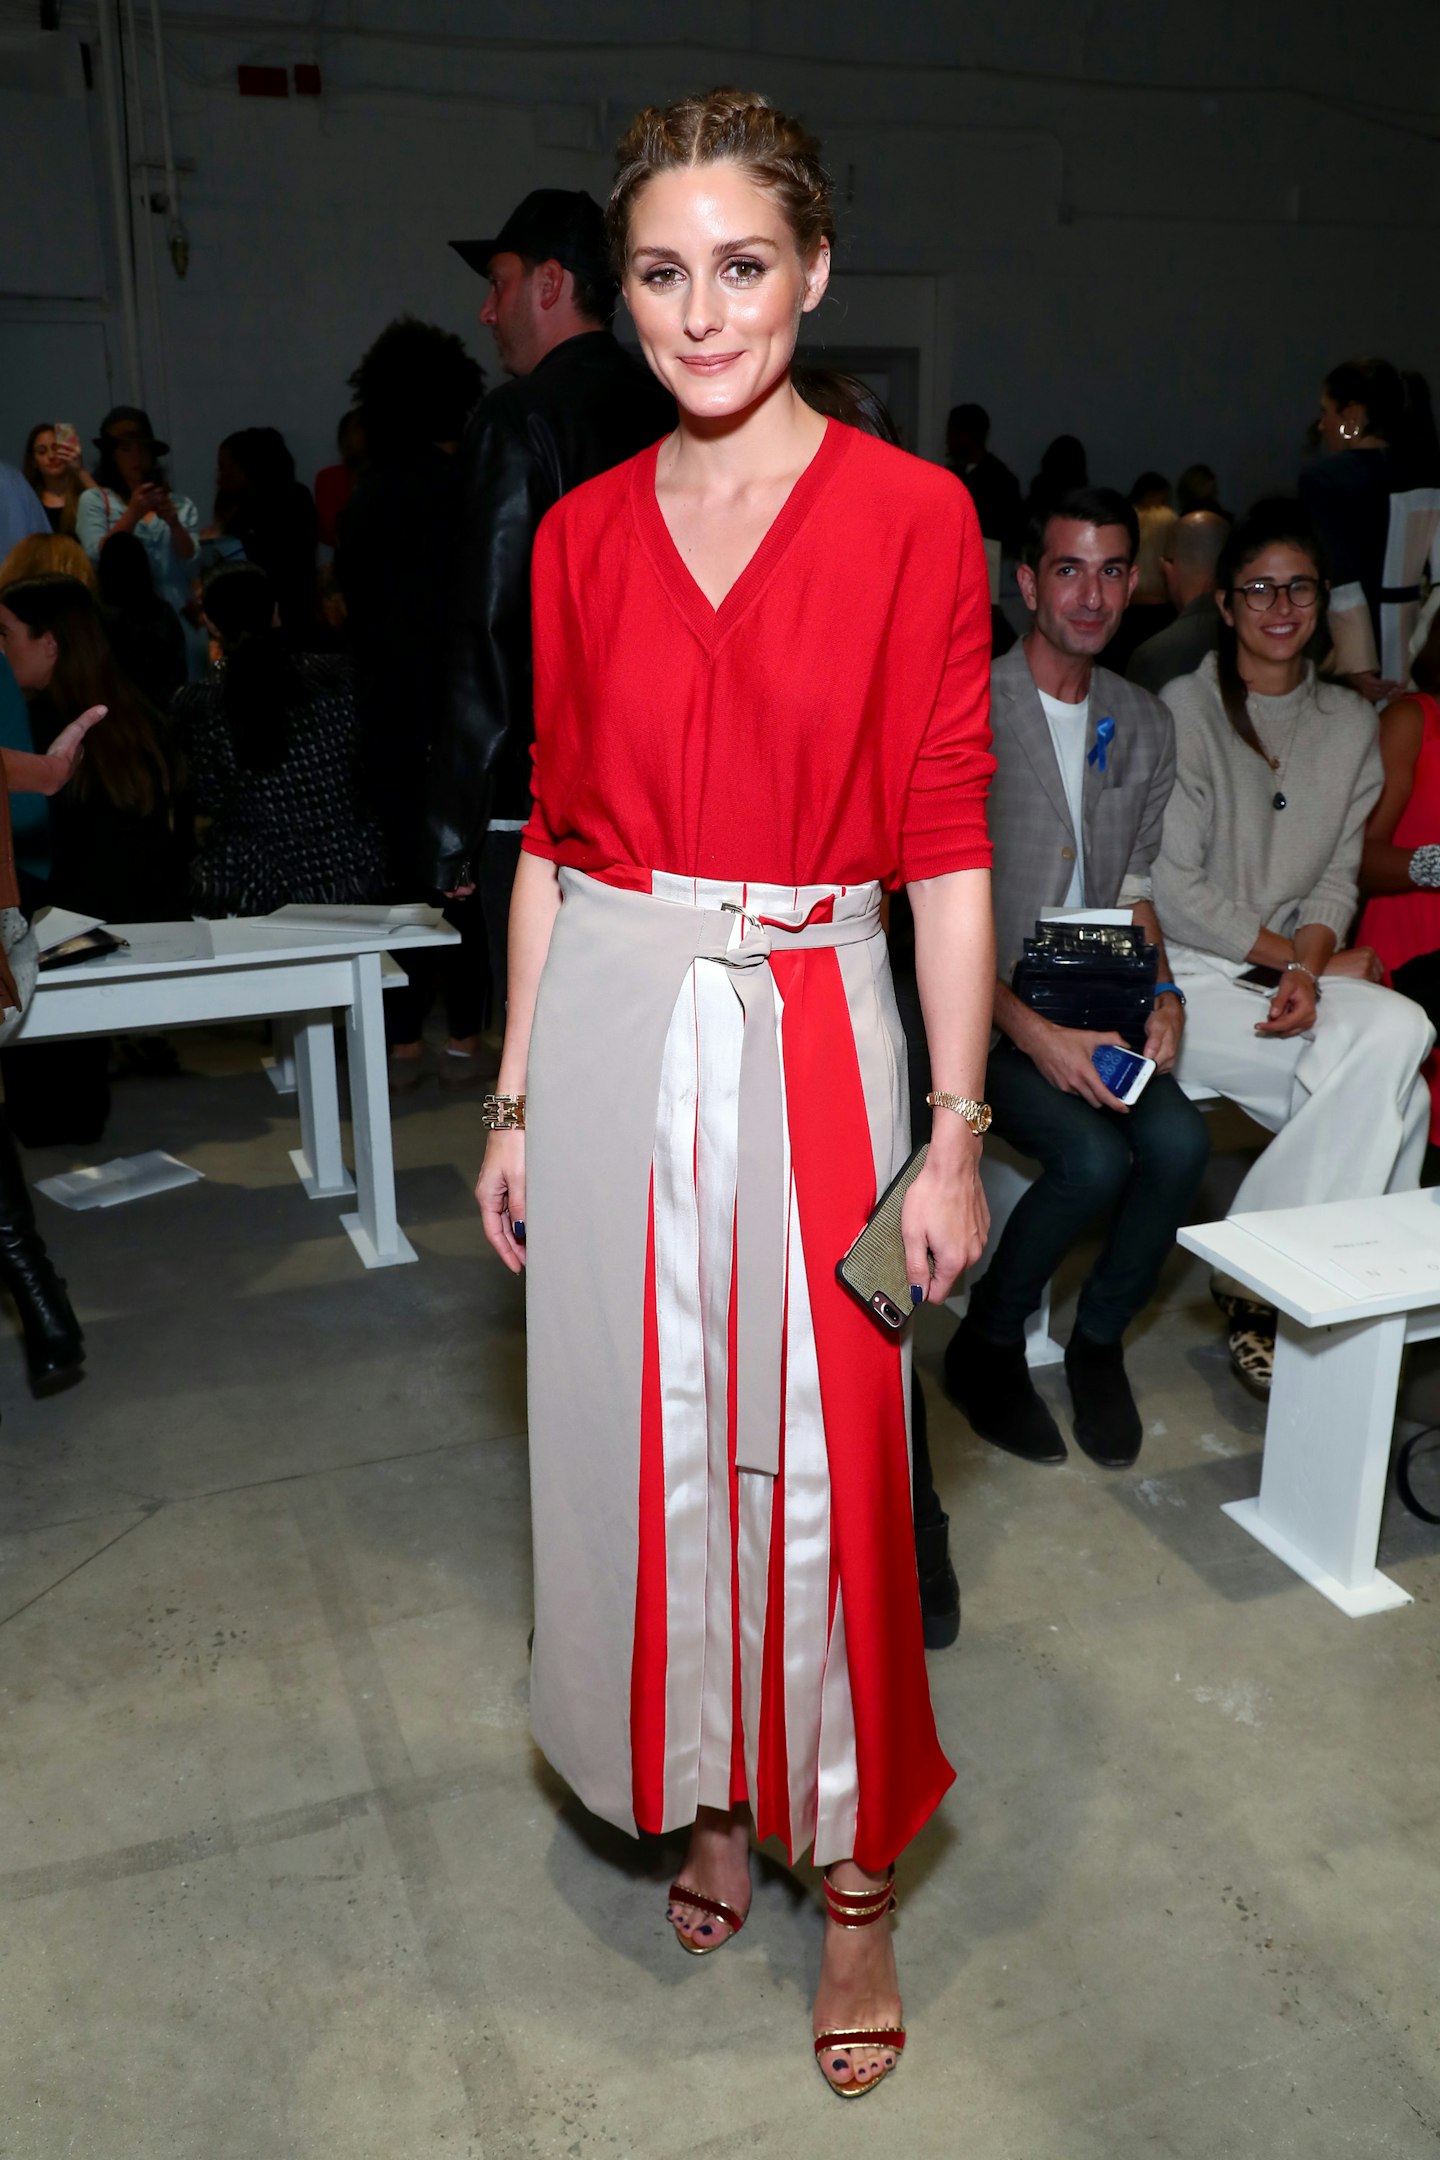 NYFW veteran Olivia Palermo brought graphic stripes to the front row at Prabal Gurung